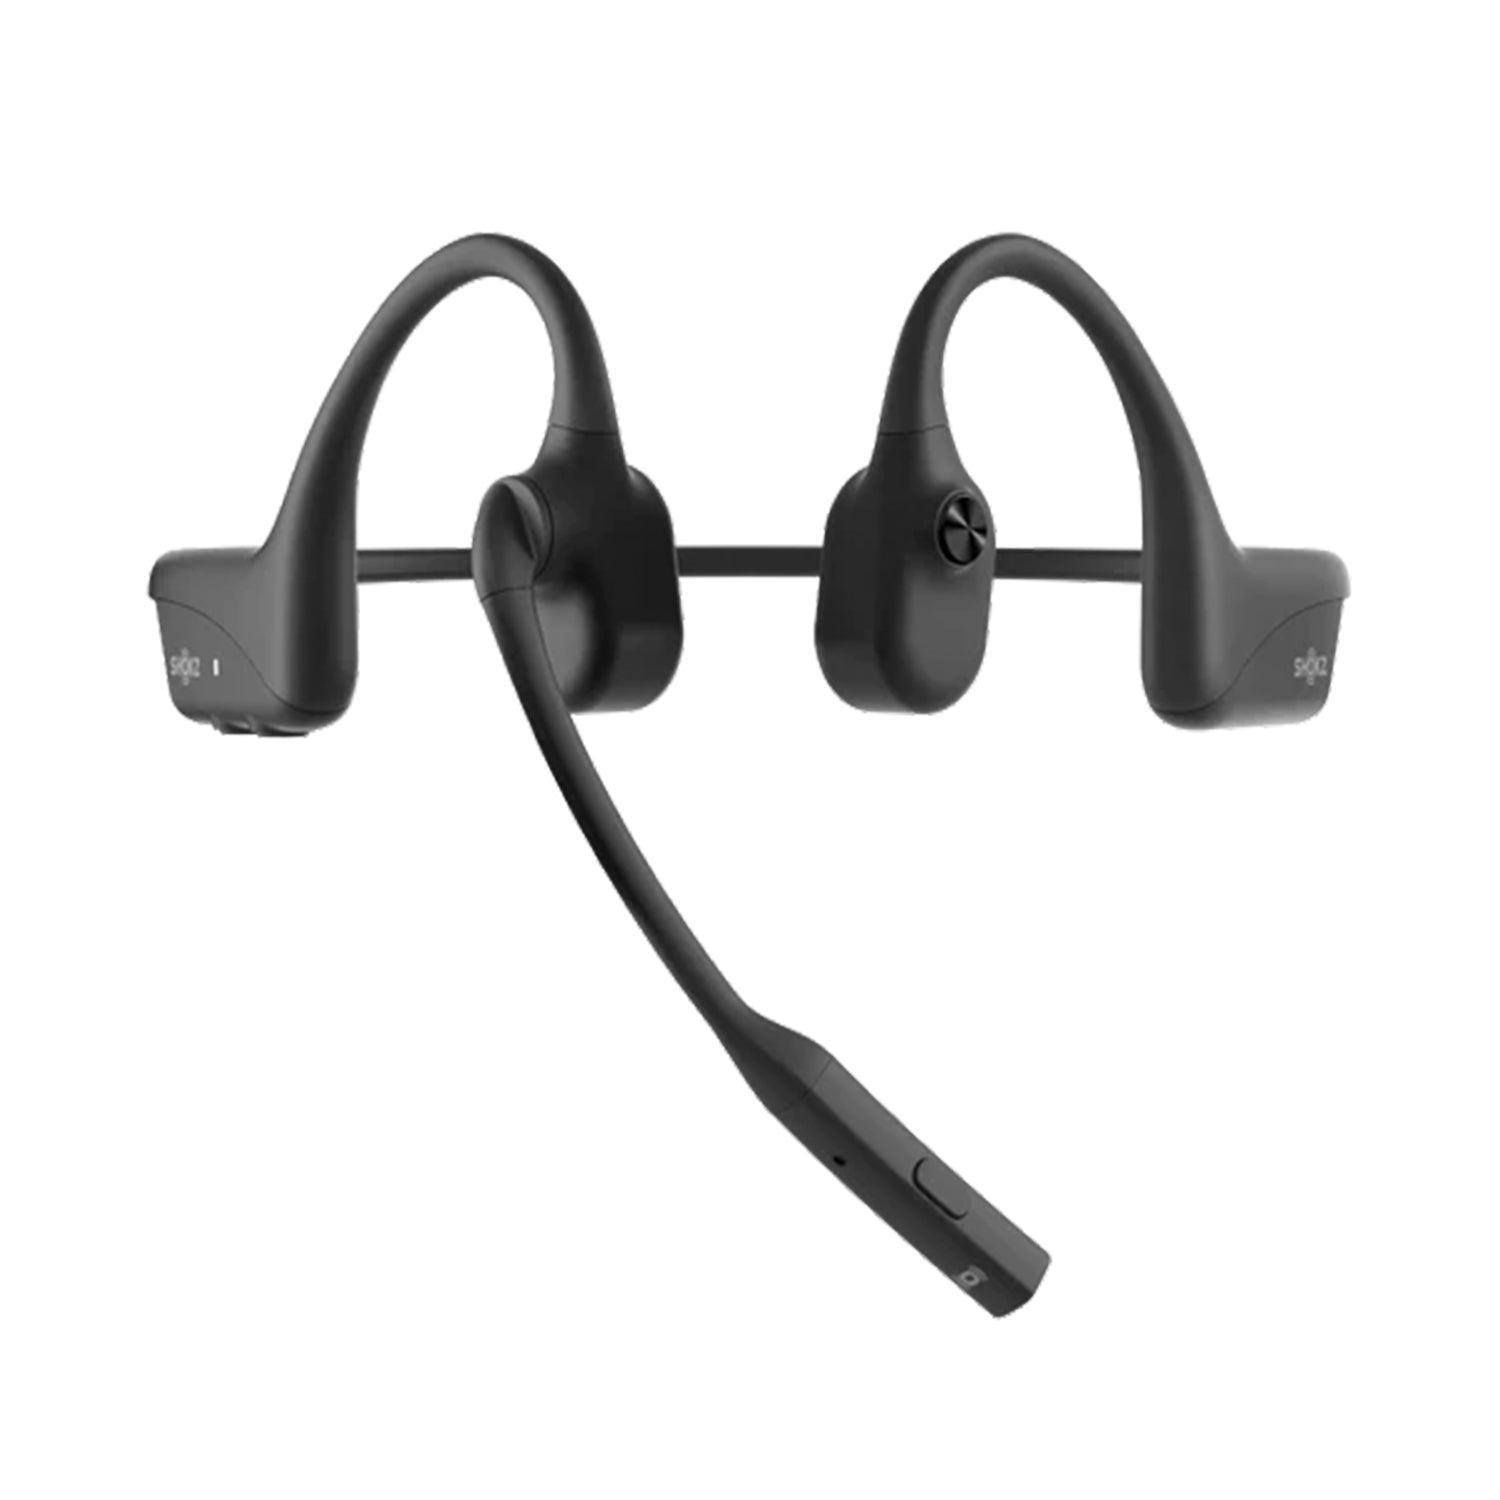 SHOKZ Opencomm 2 Open-Ear Bluetooth Headphones, 7th Generation Bone Conduction Technology With Adjustable, Dual Noise-Canceling Microphone